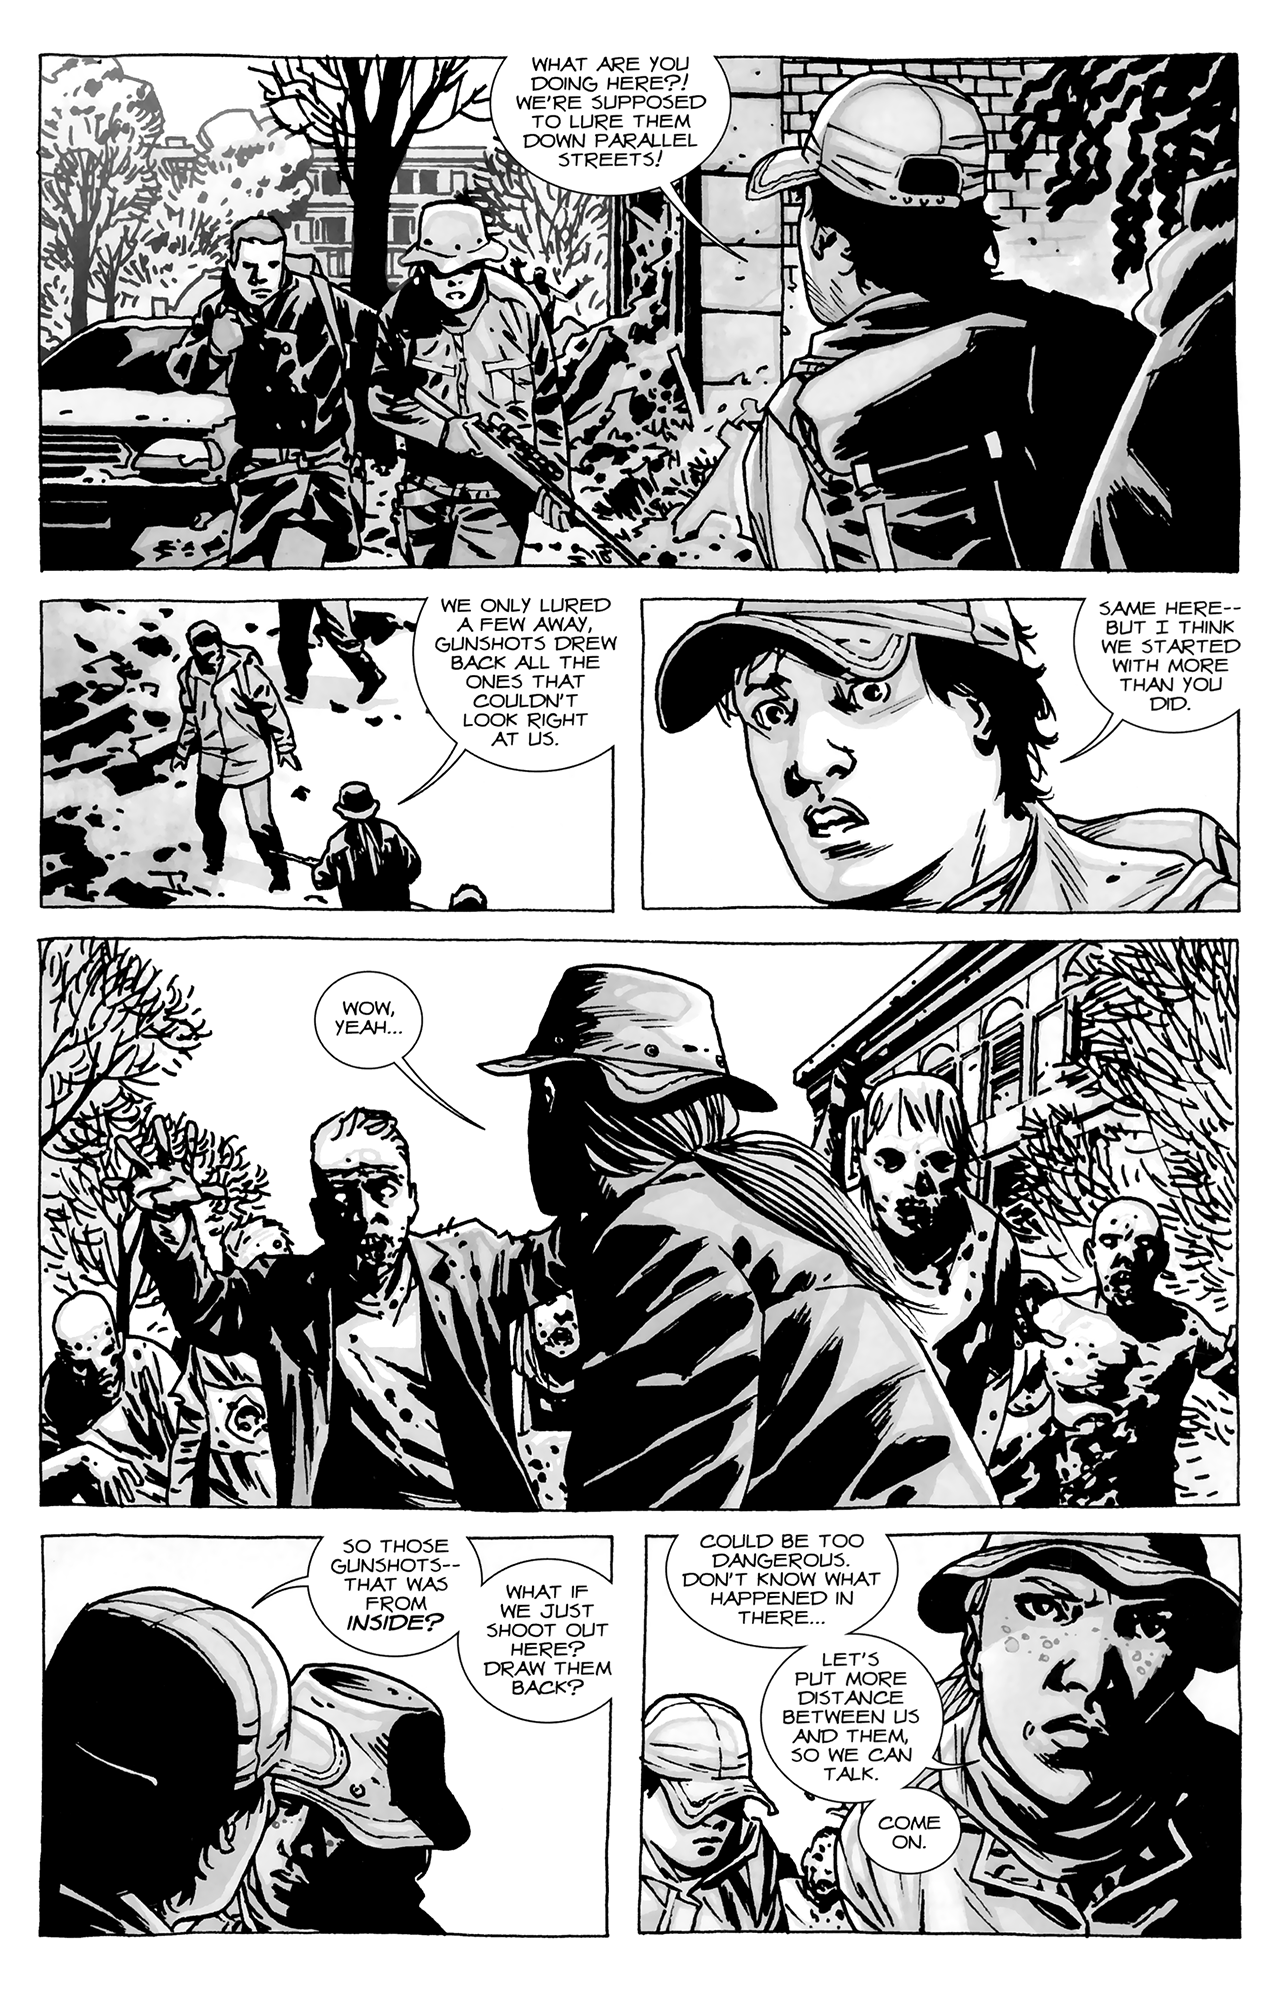 The Walking Dead 84 - No Way Out, Part 5